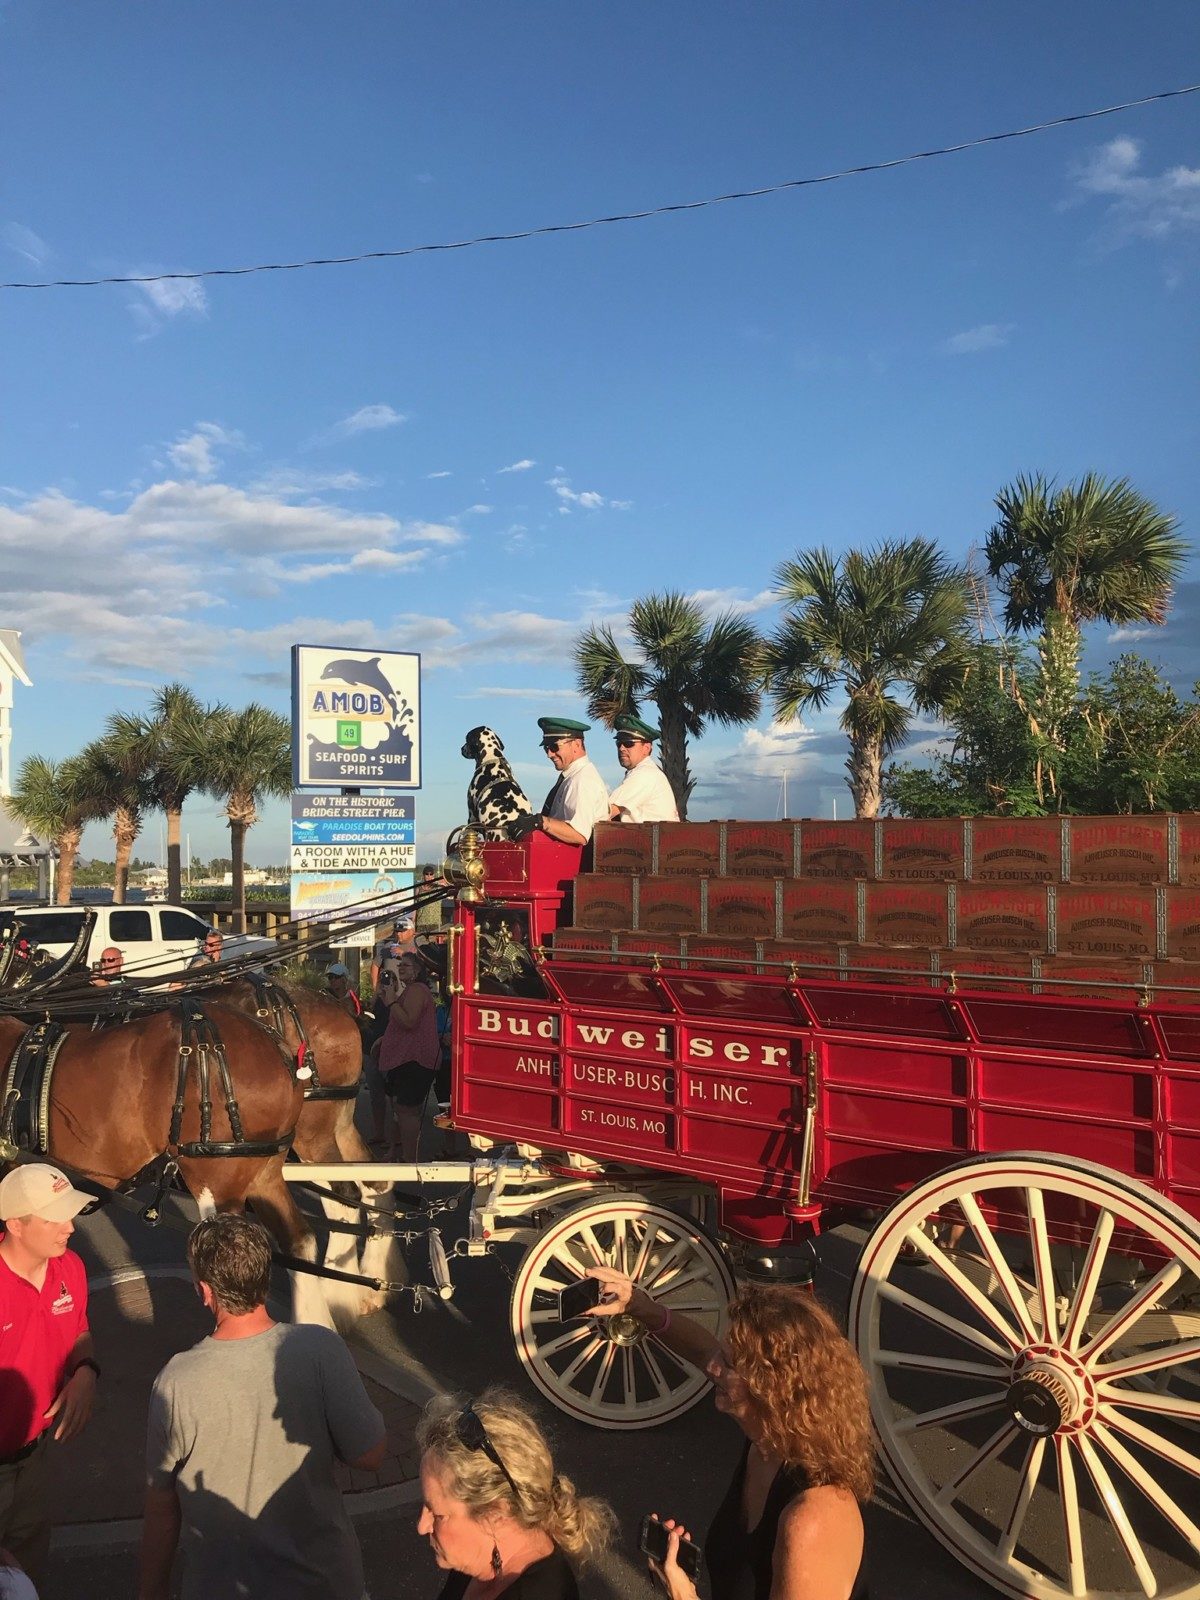 HISTORIC BRIDGE STREET WELCOMES THE BUDWEISER CLYDESDALES